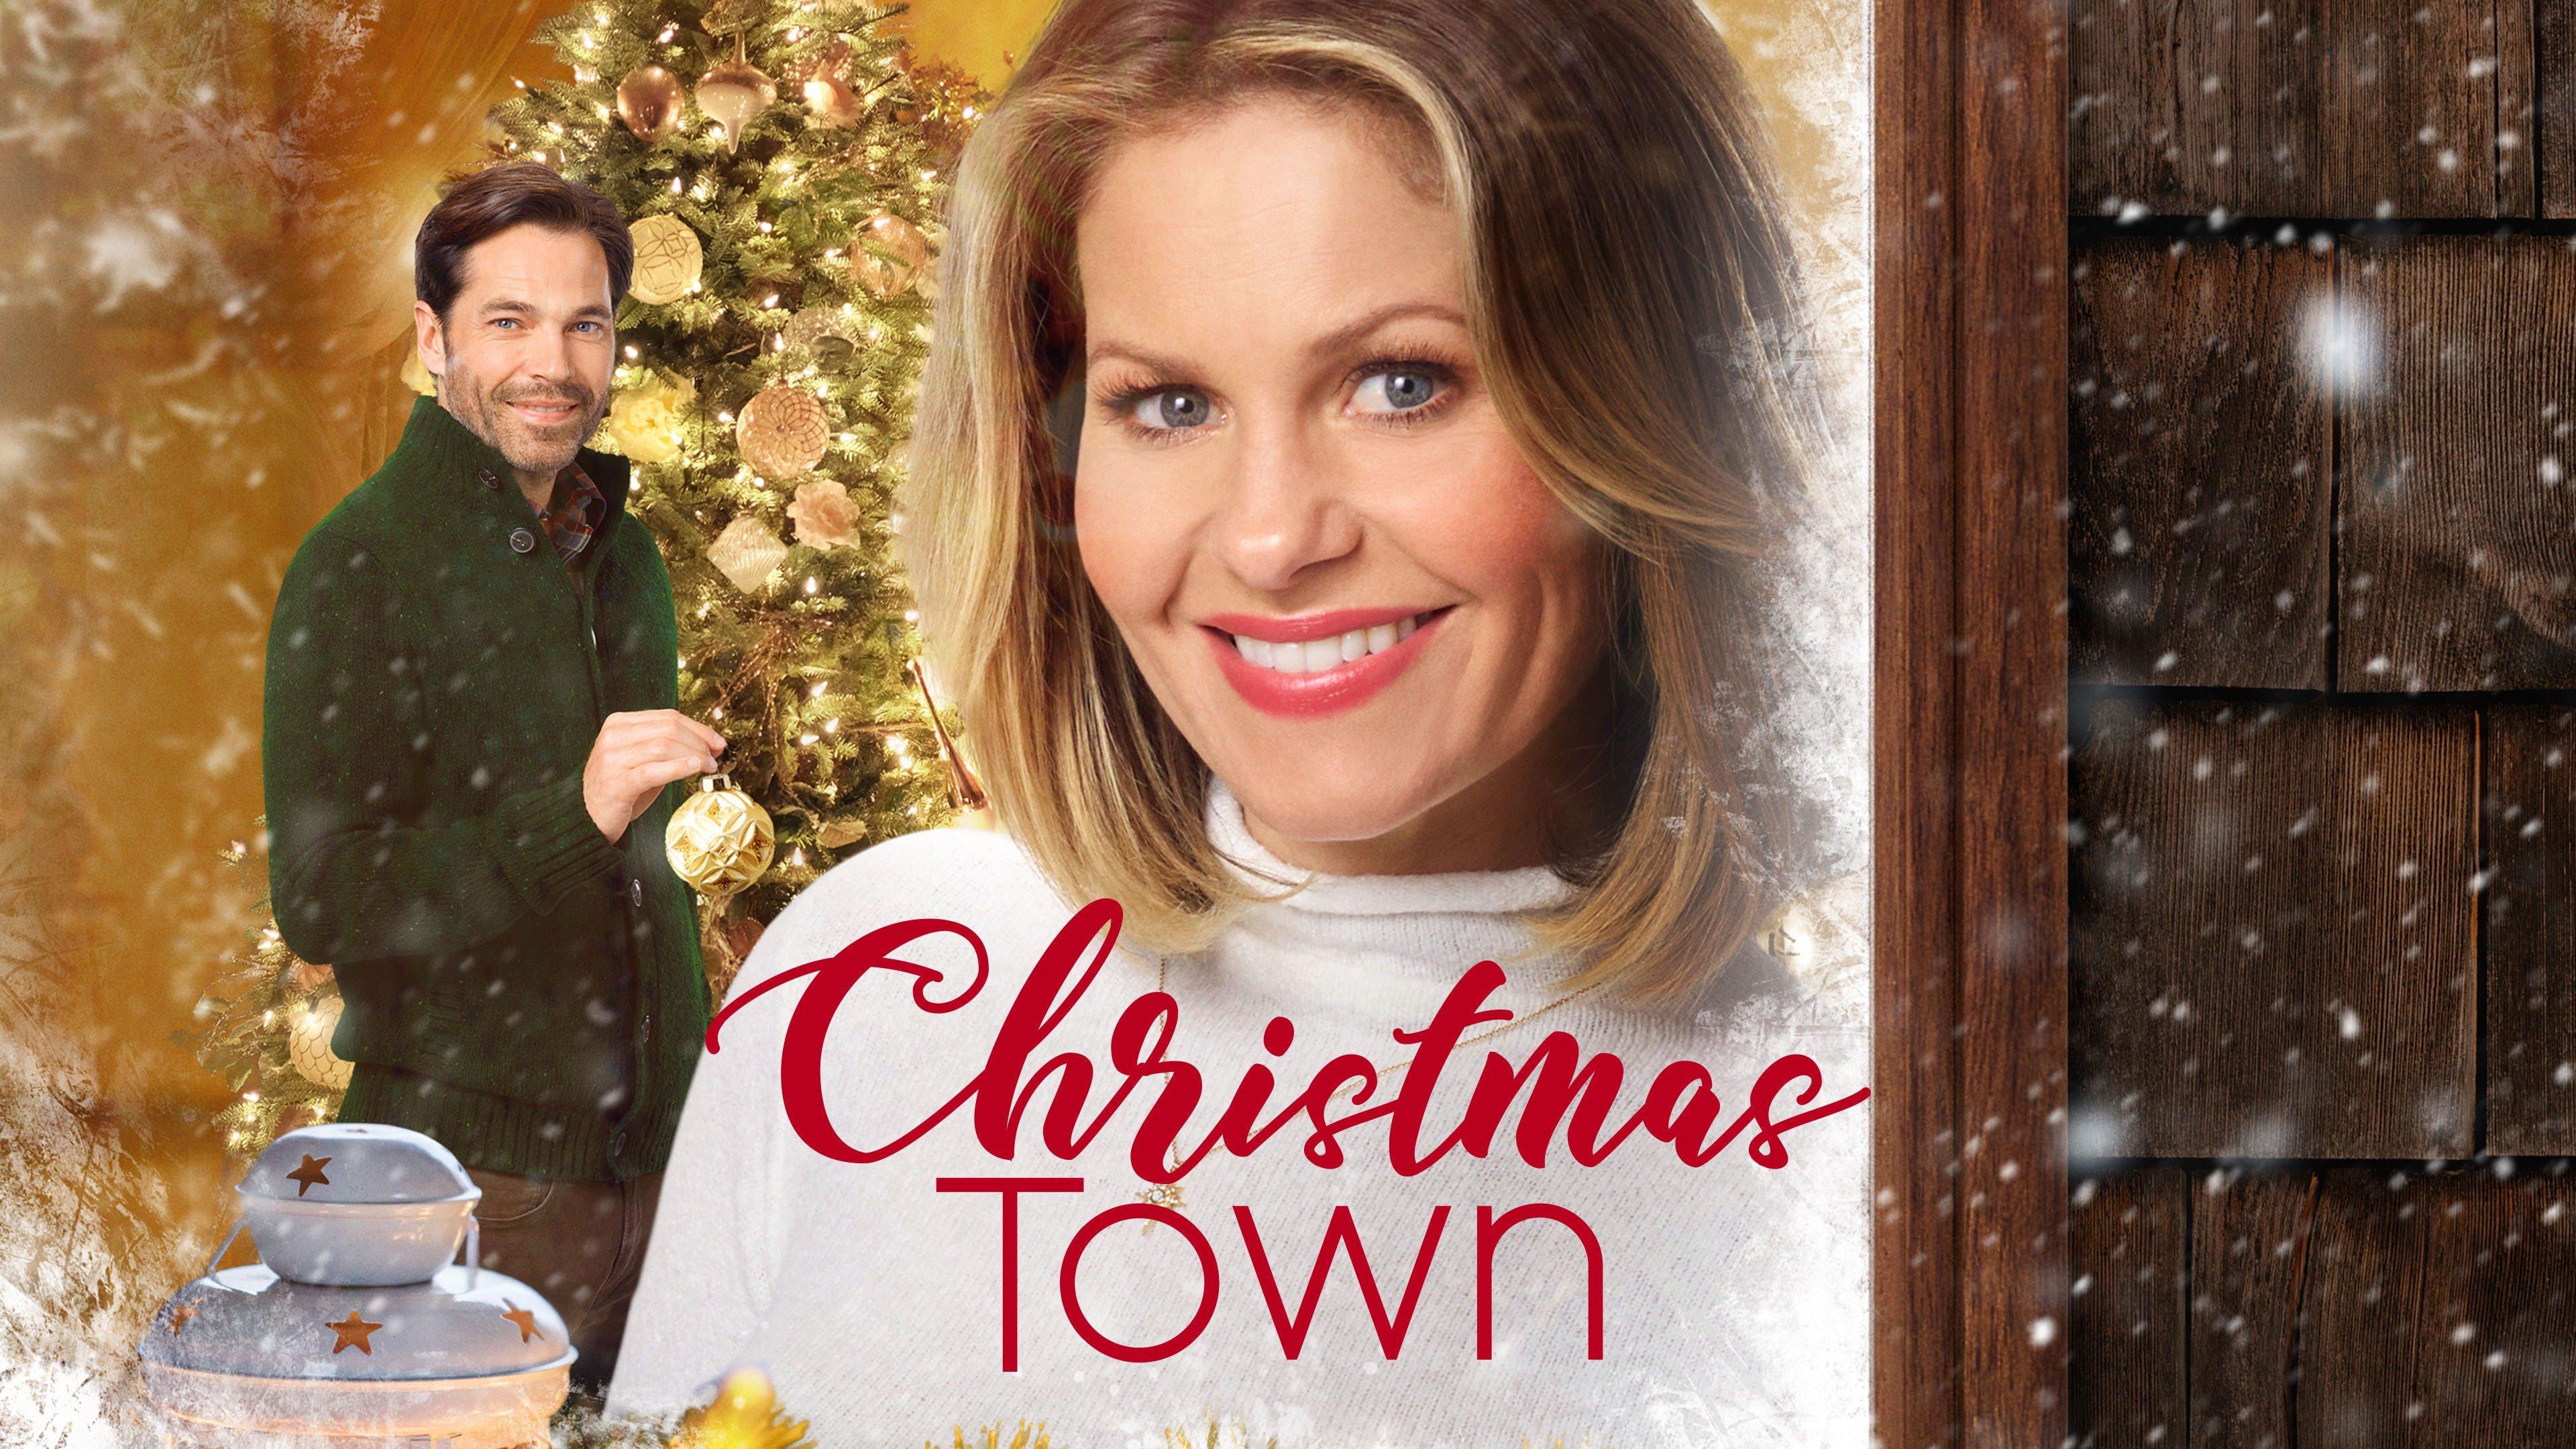 Watch Christmas Town Streaming Online on Philo (Free Trial)